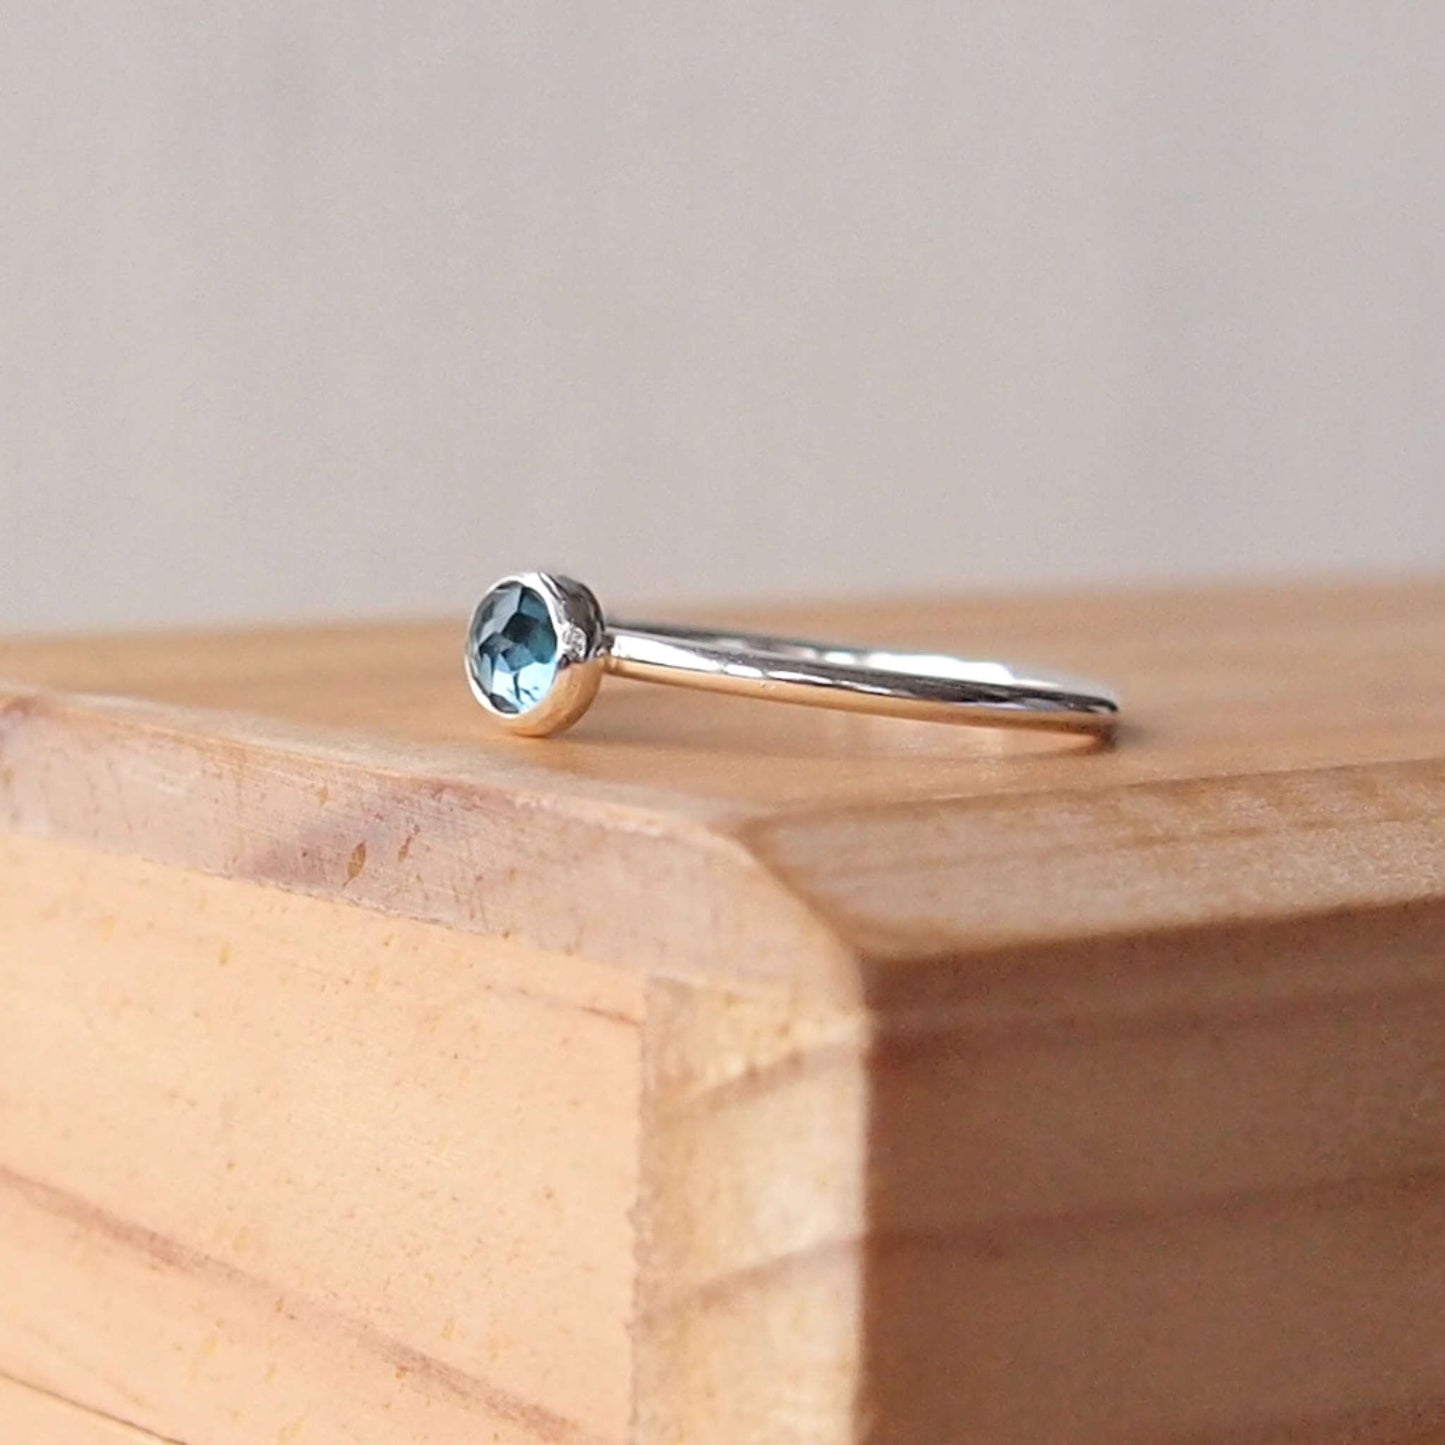 London Blue Topaz Sterling Silver Gemstone ring with a round 5mm facet cut teal Blue cabochon. Handmade in Scotland by maram jewellery